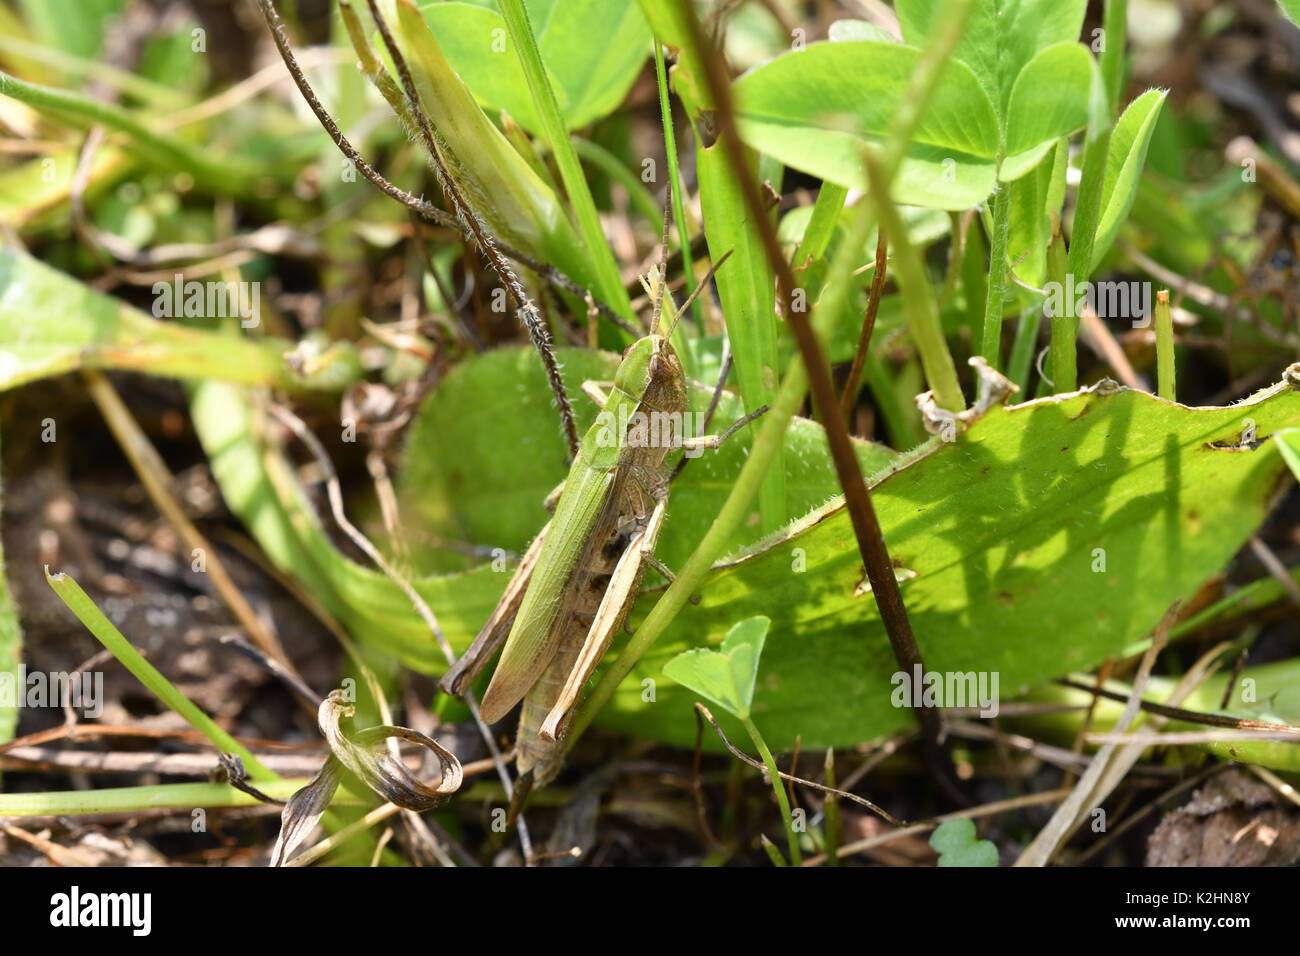 insect Grasshopper hidden on the grass Stock Photo